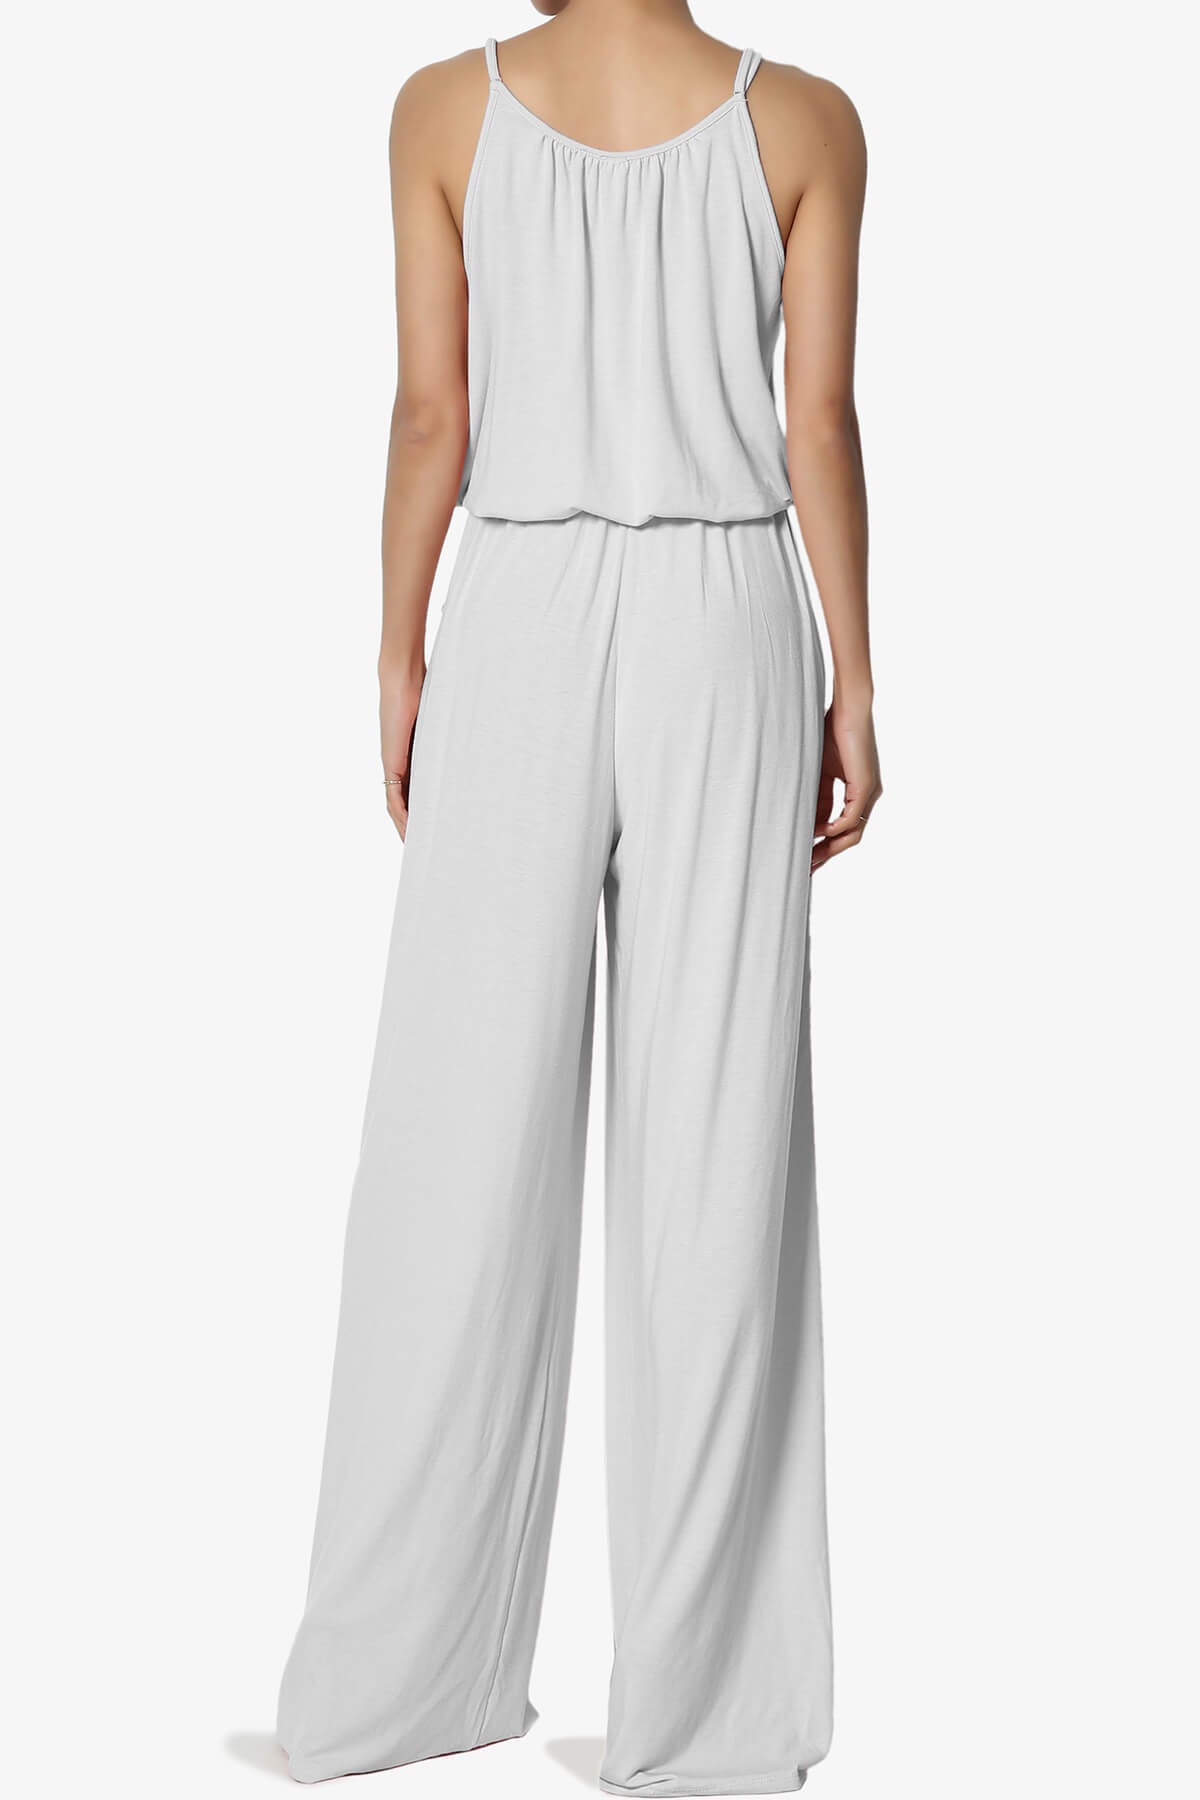 Load image into Gallery viewer, Daelynn Strappy Wide Leg Jumpsuit LIGHT GREY_2
